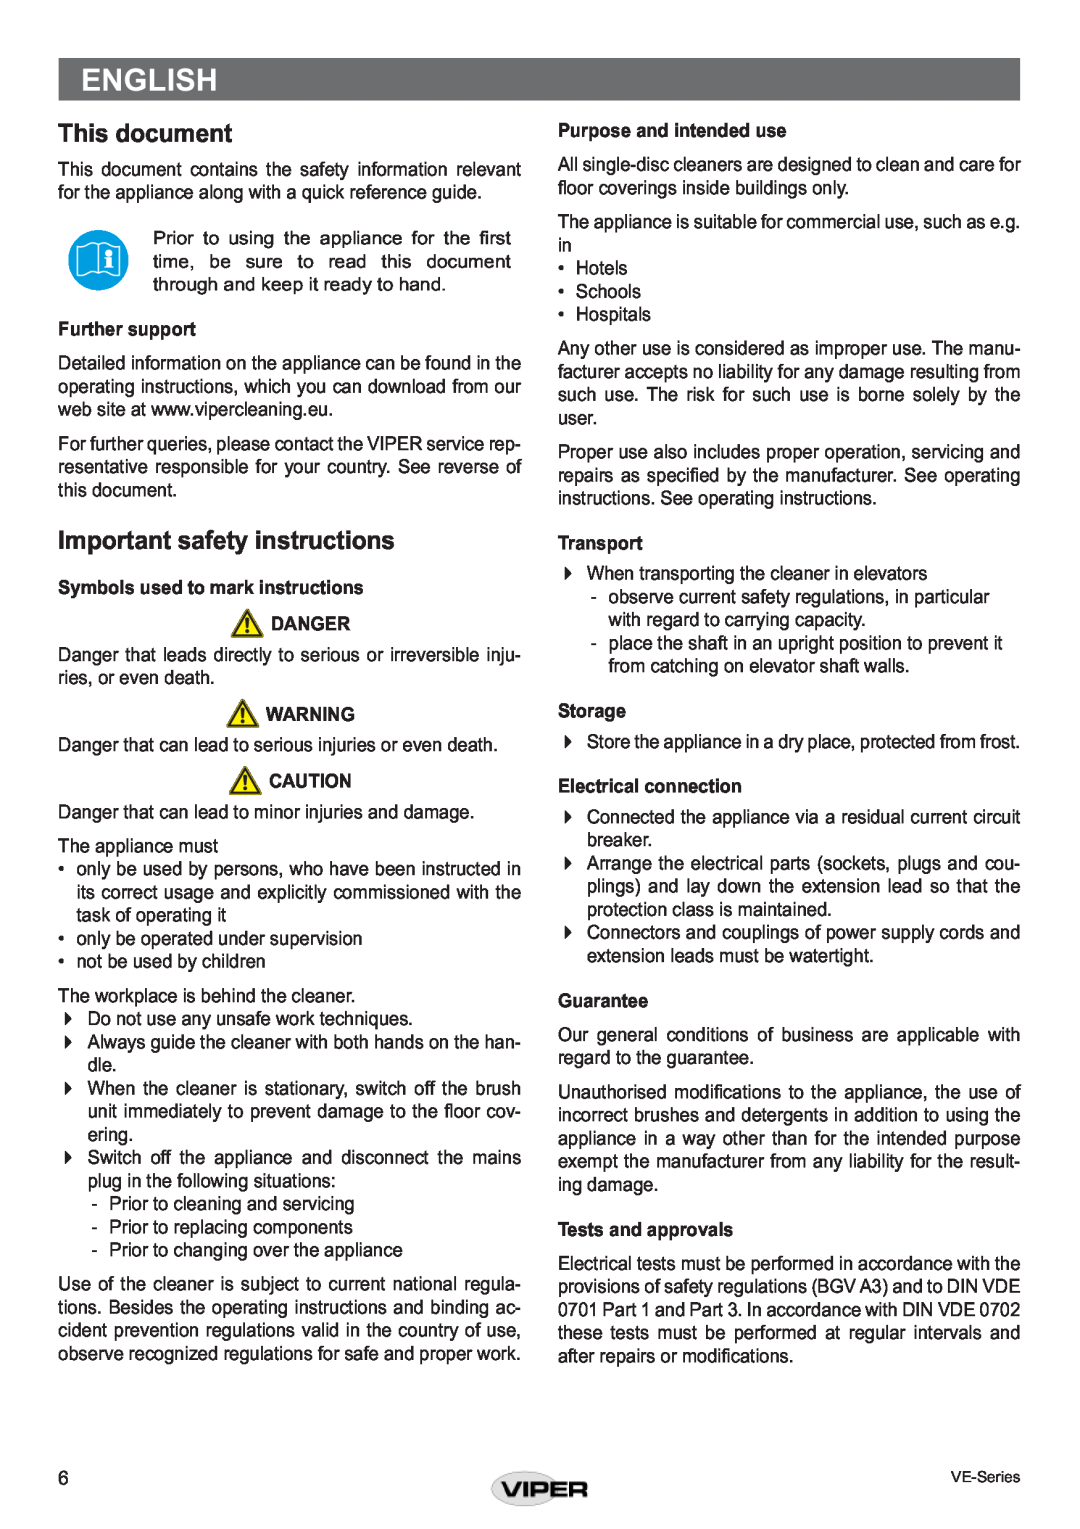 Viper VE 13 P English, This document, Important safety instructions, Further support, Purpose and intended use, Transport 